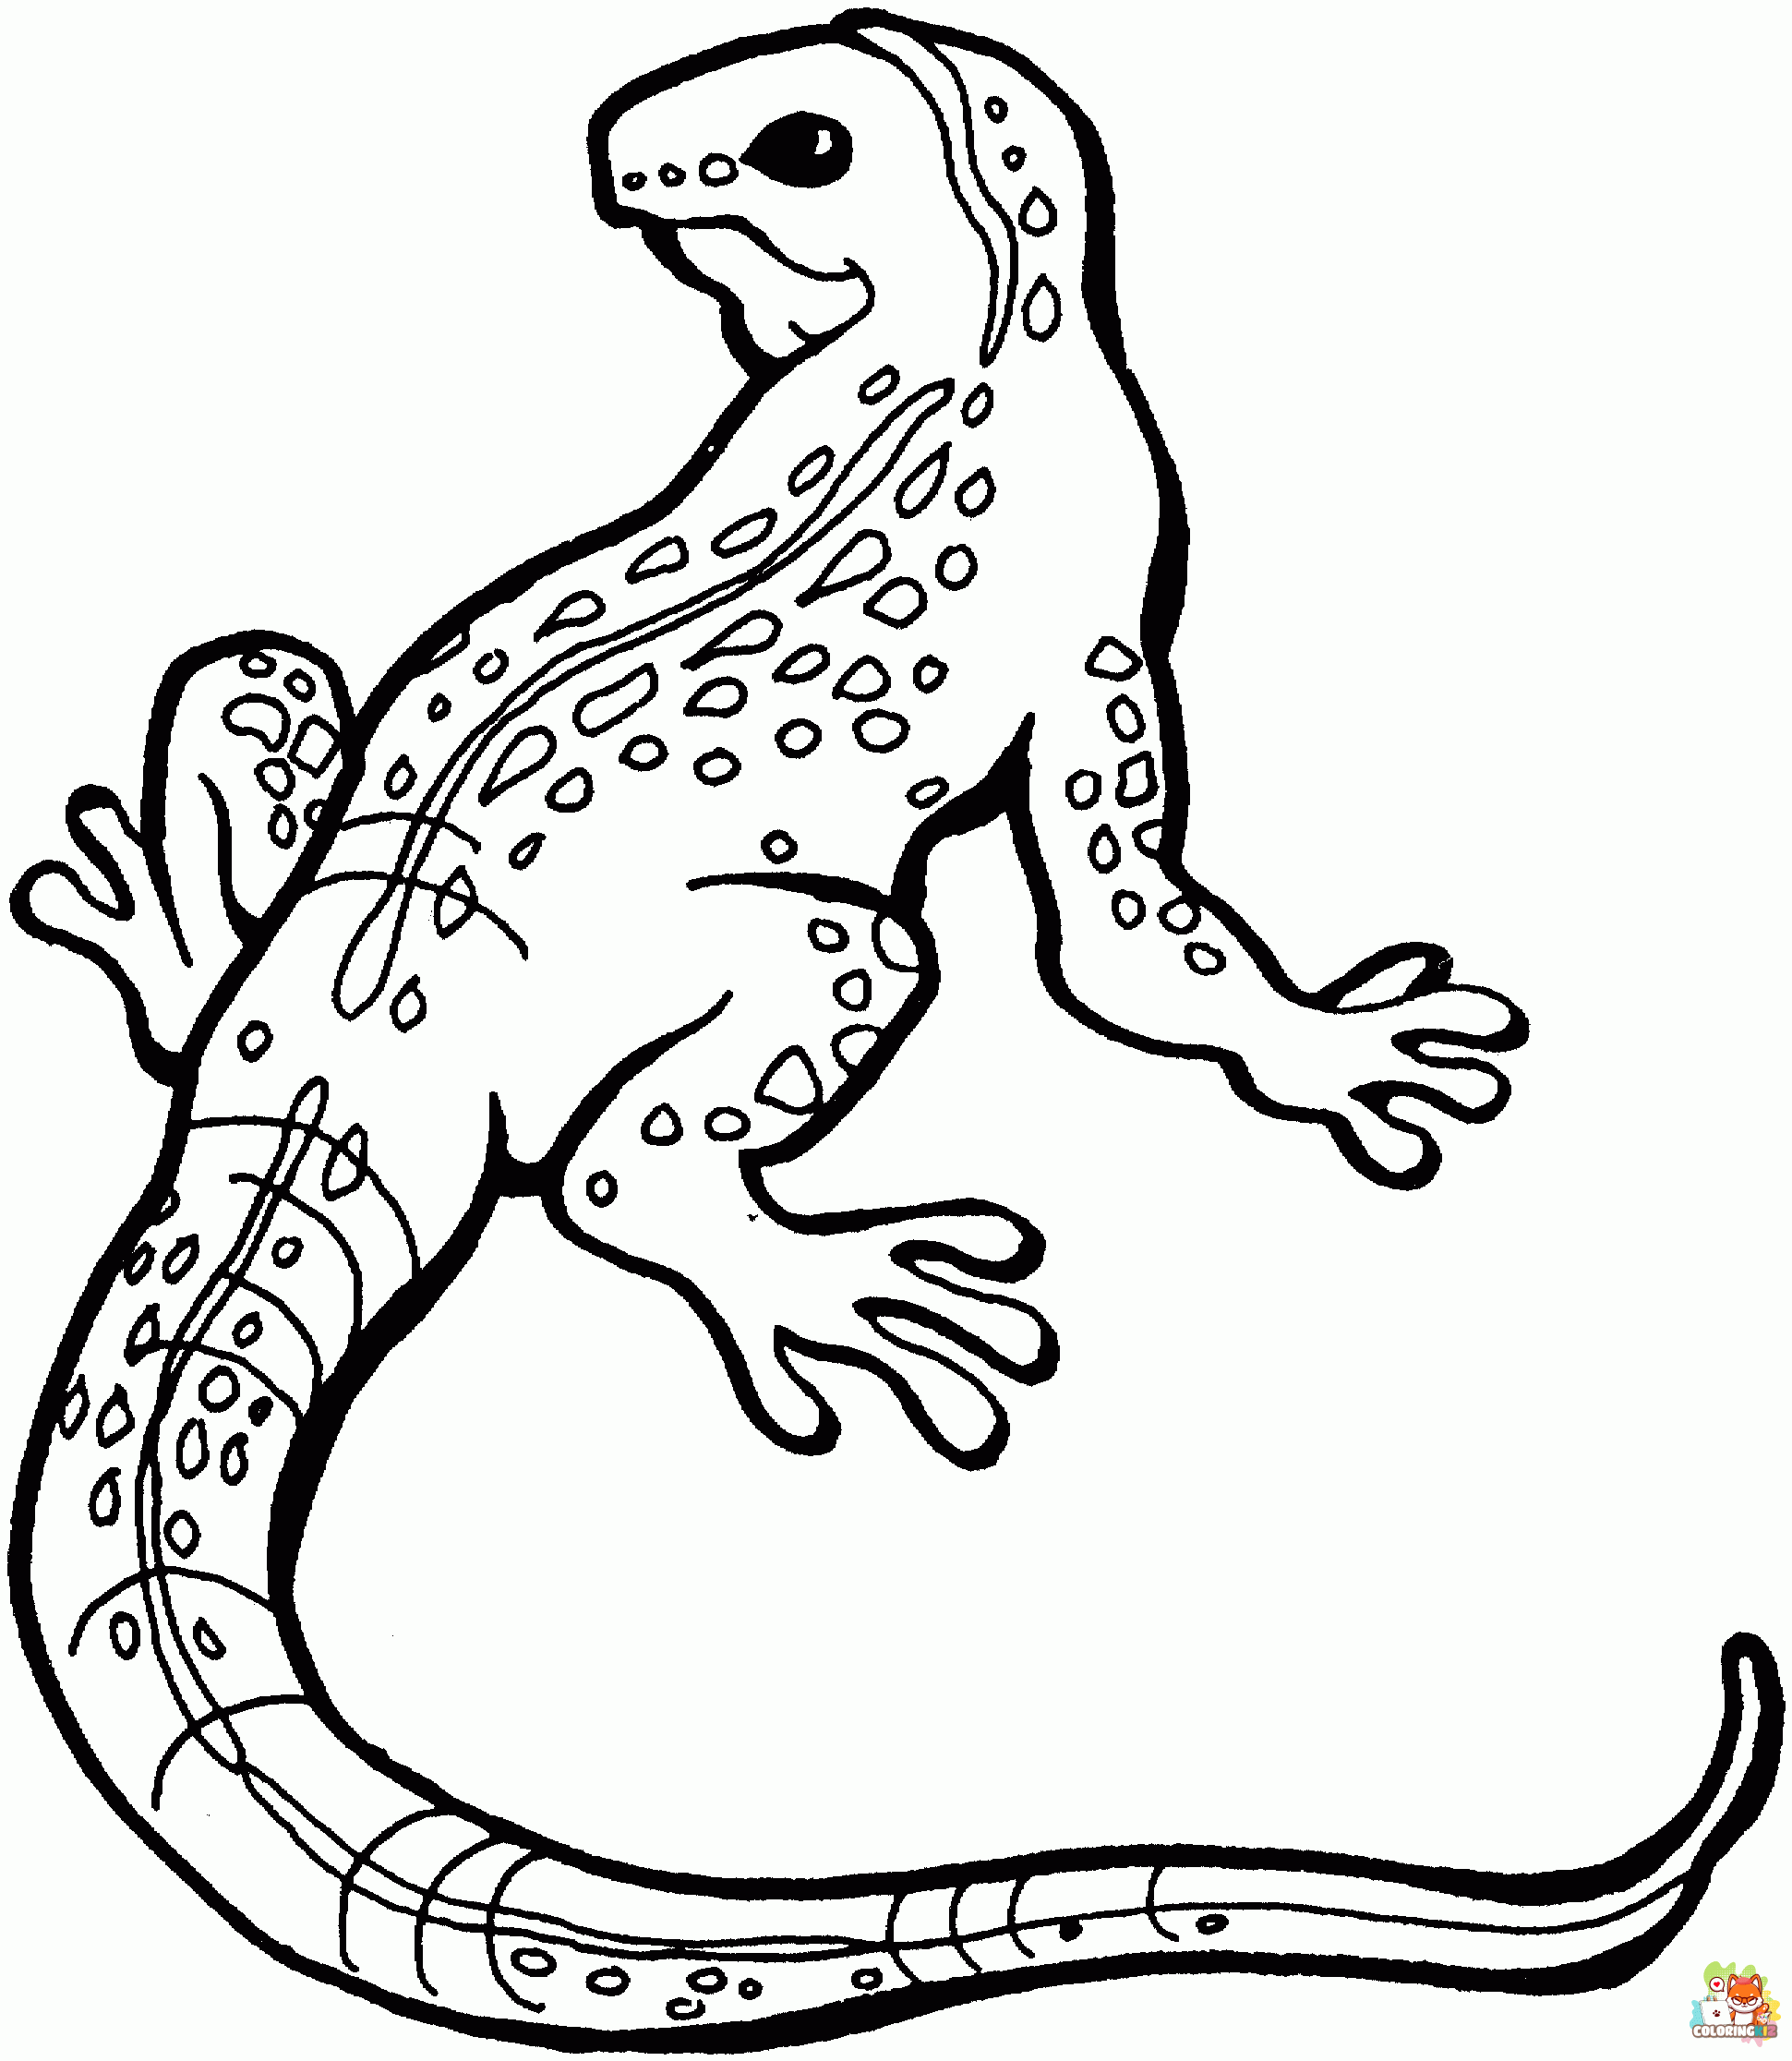 Lizard coloring pages free